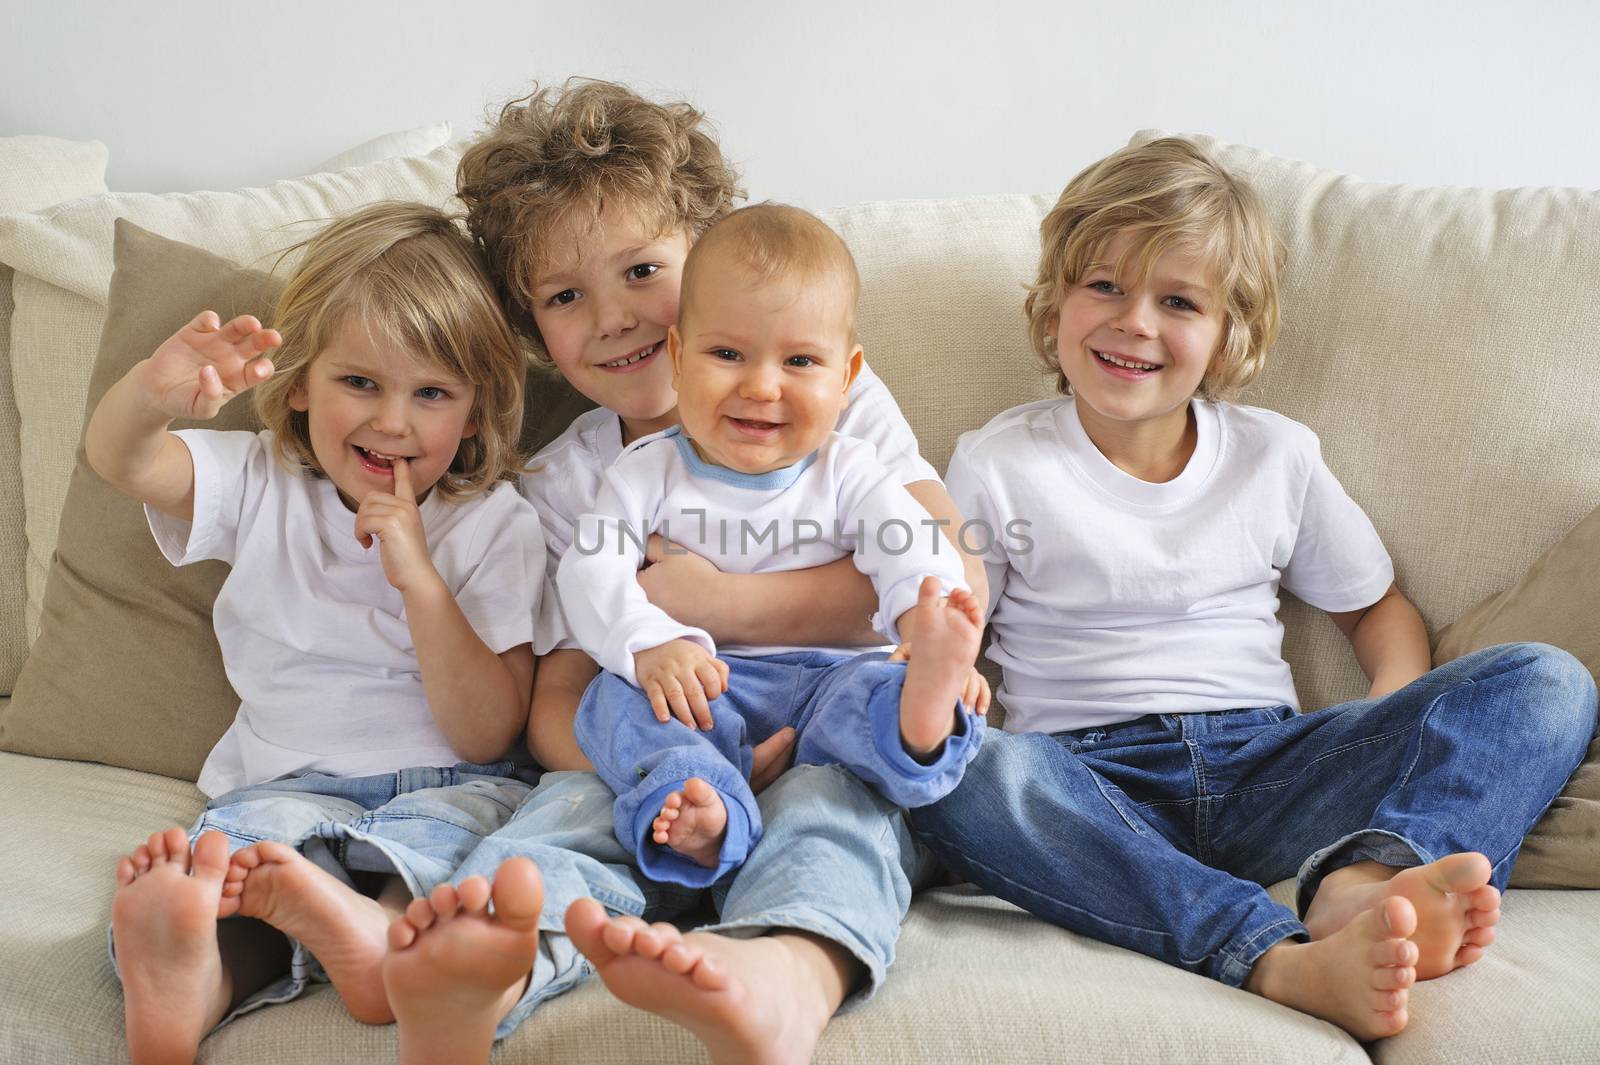 Four brothers, young boys, sitting on a sofa. The eldest is holding a baby in his lap. They're looking to the left of the camera